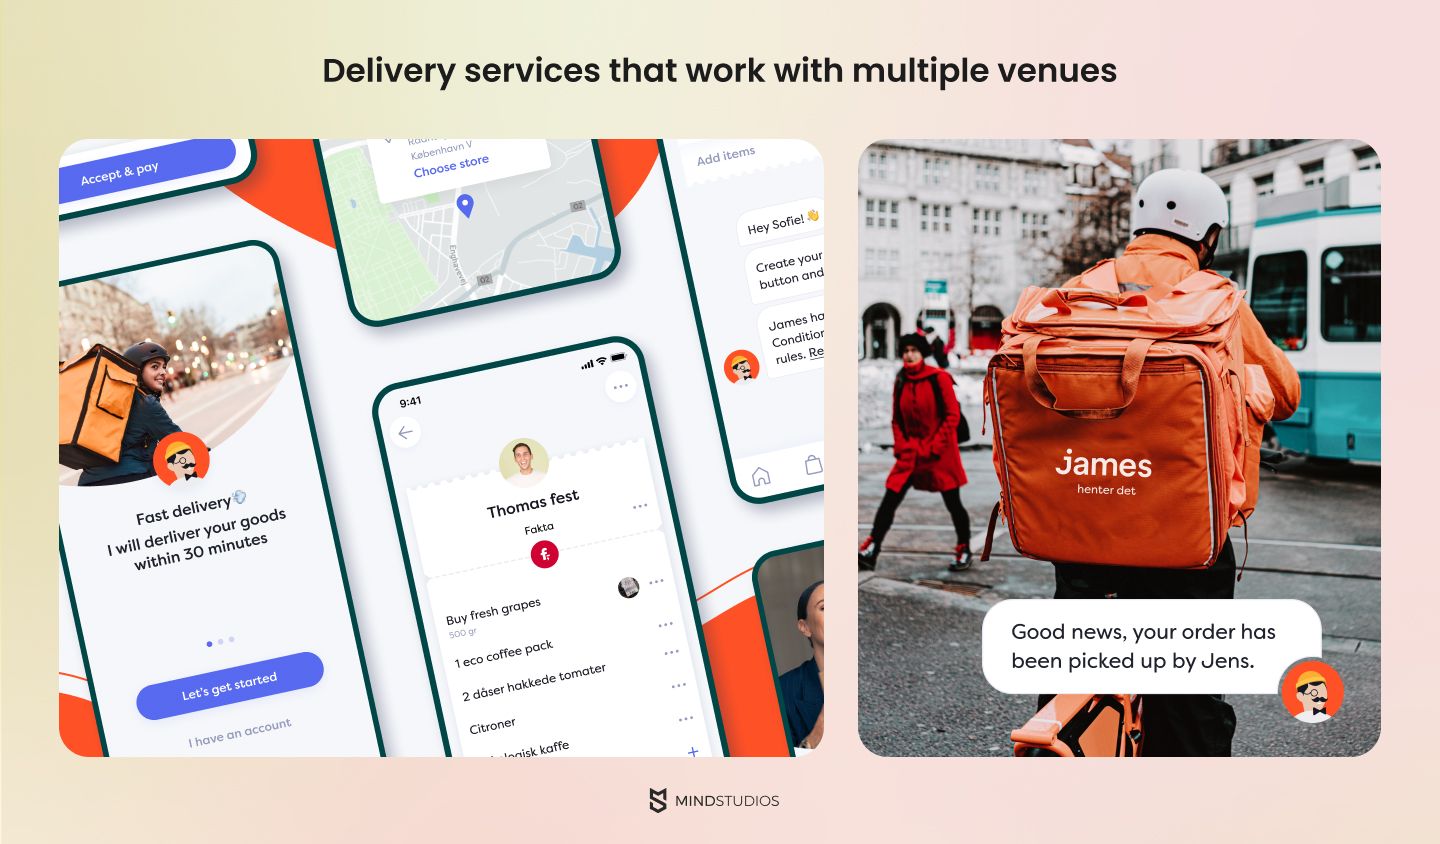 Delivery services that work with multiple venues